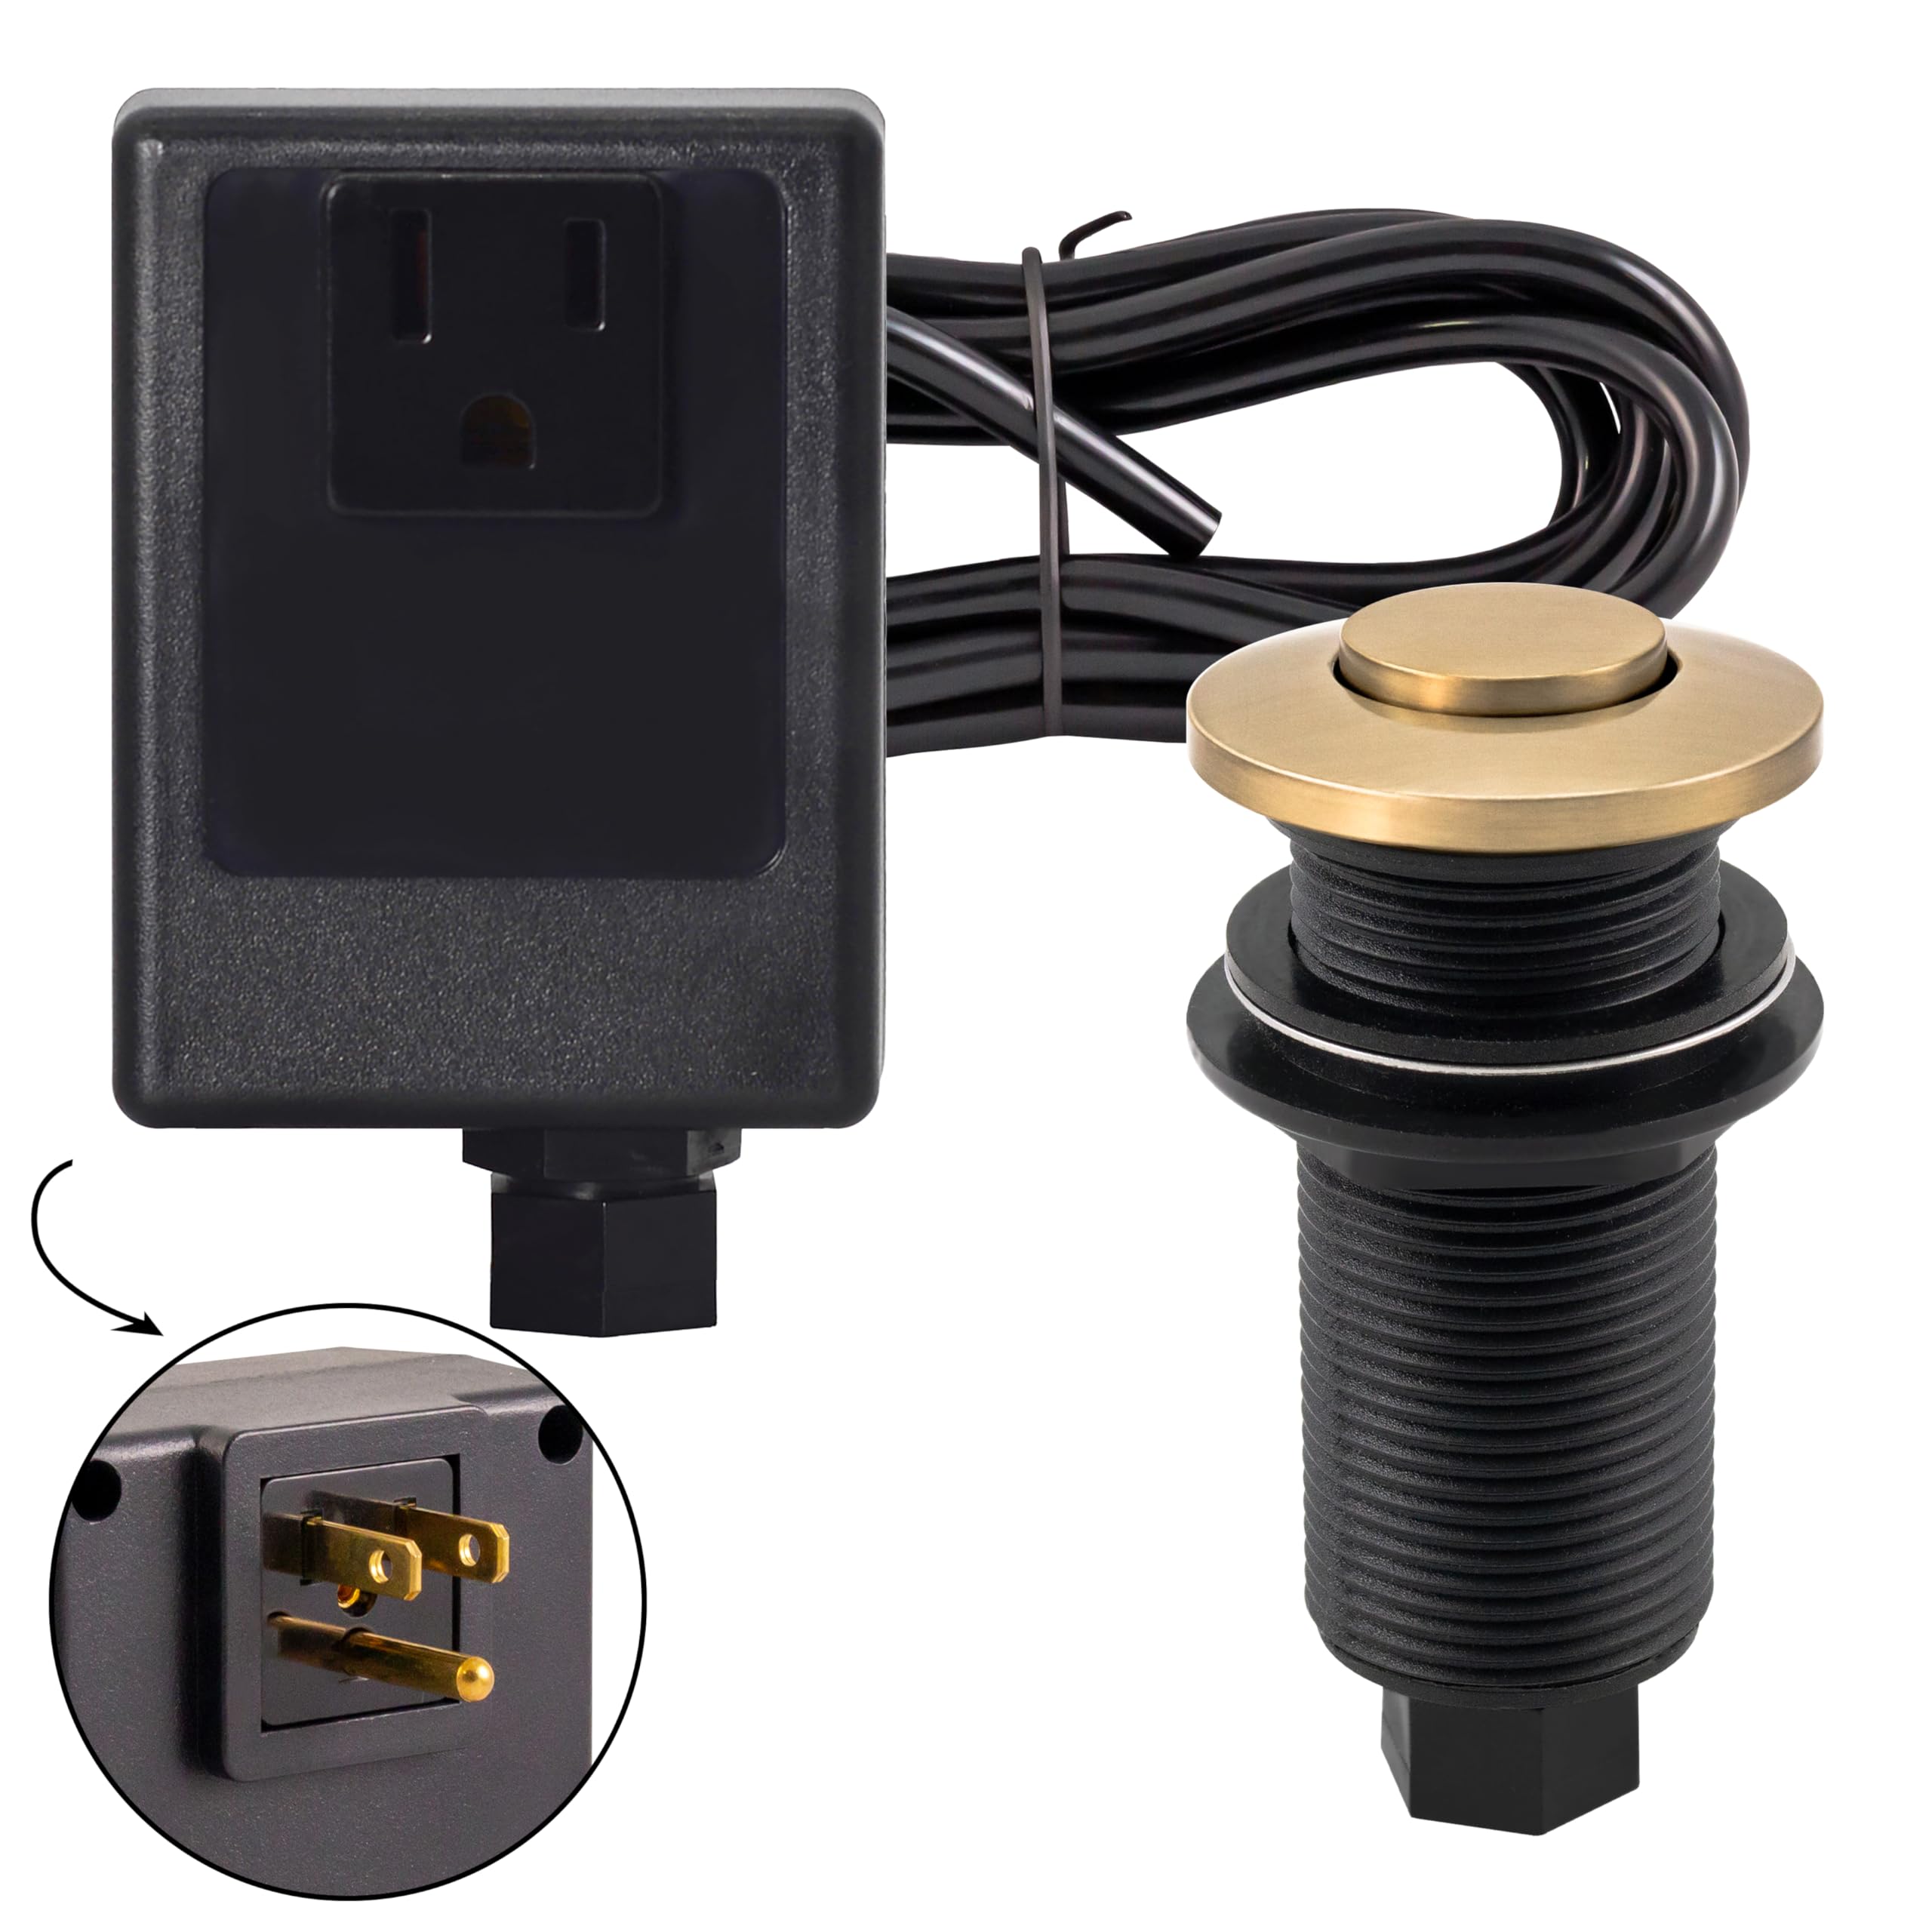 Westbrass ASB-19 Sink Top Waste Disposal Air Switch and Single Outlet Control Box, Flush Button, 1-Pack, Champagne Bronze